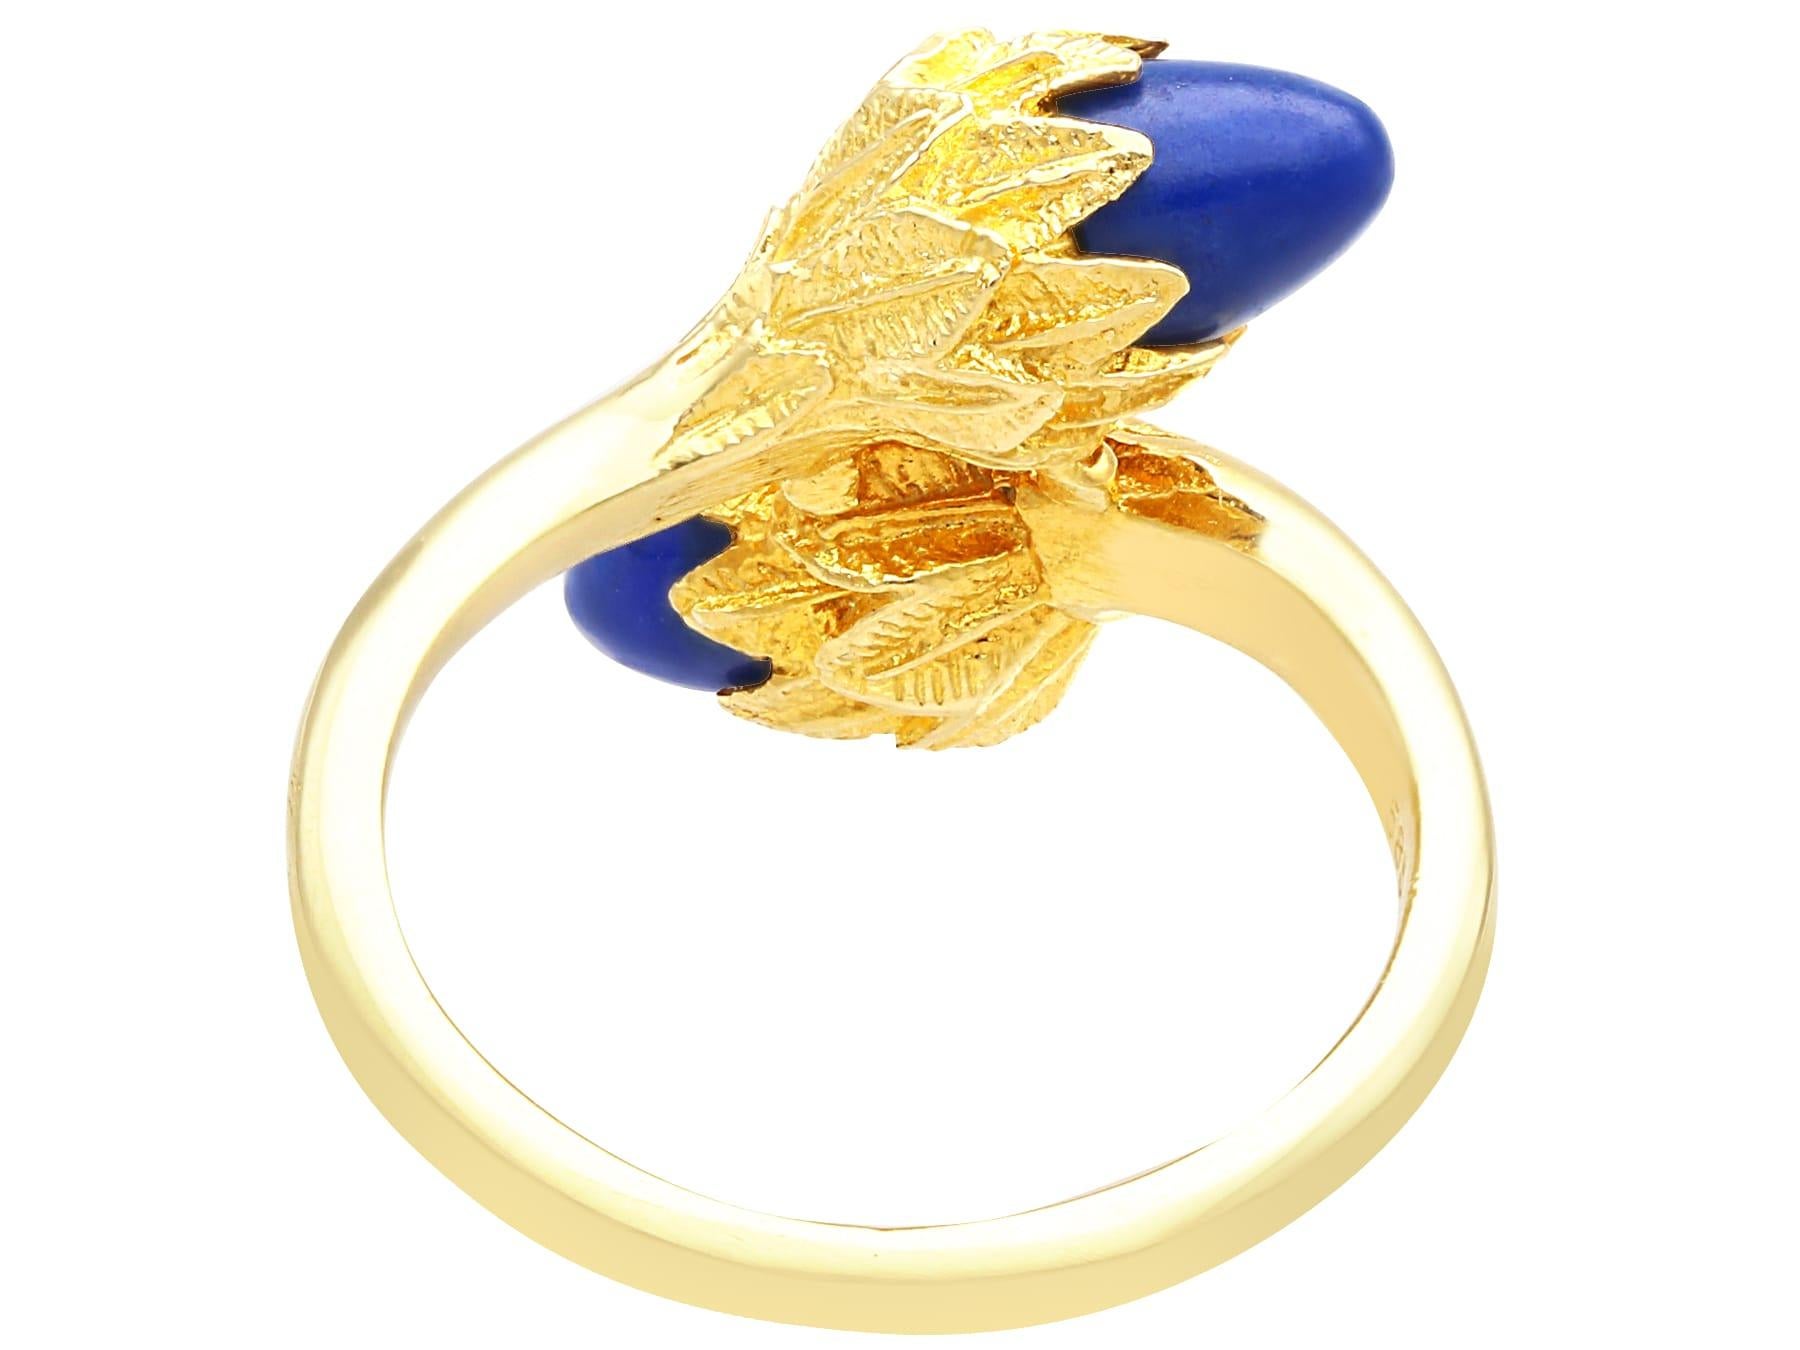 Cabochon Vintage 1.32 Carat Lapis Lazuli and 14k Yellow Gold Dress Ring For Sale